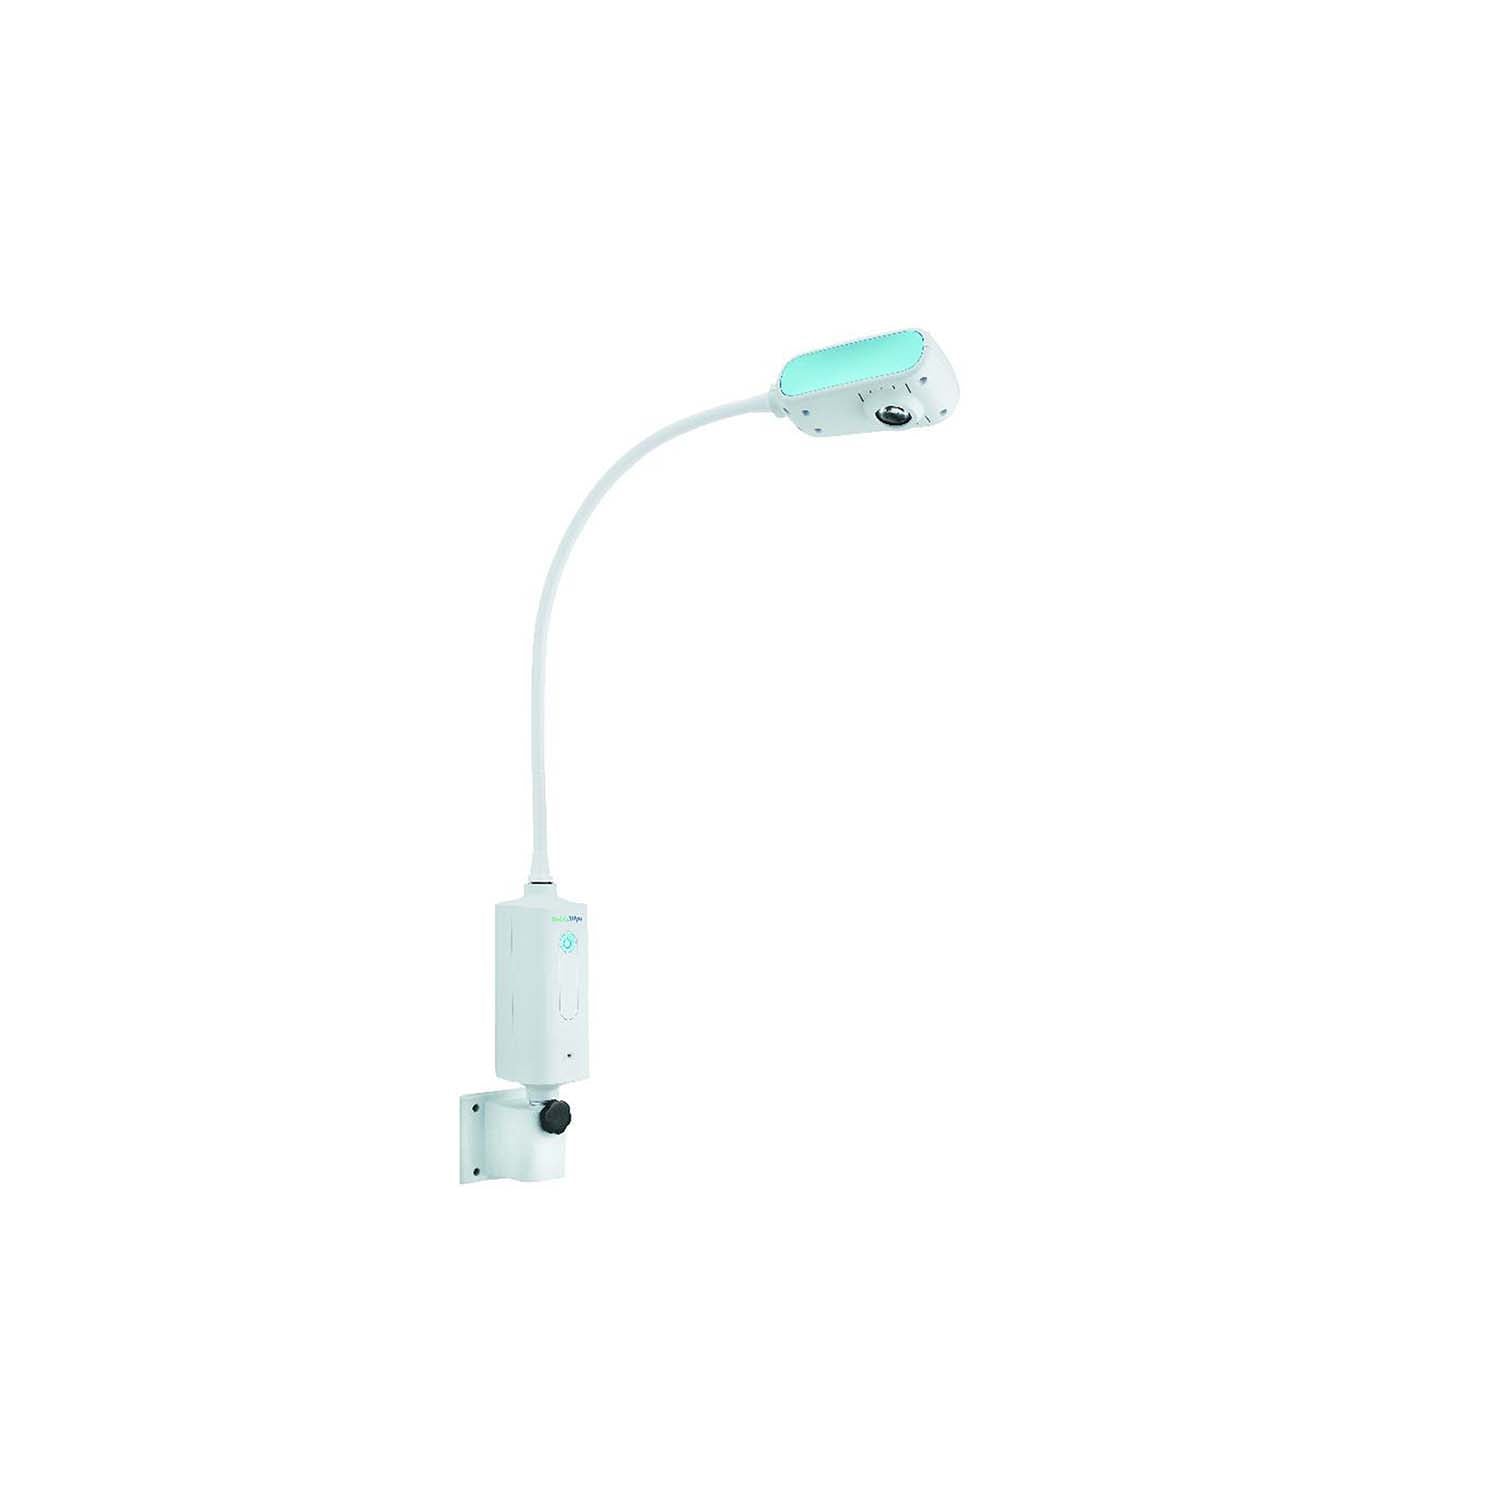 Welch Allyn GS300 General Exam Led Light with Table/Wall Mount